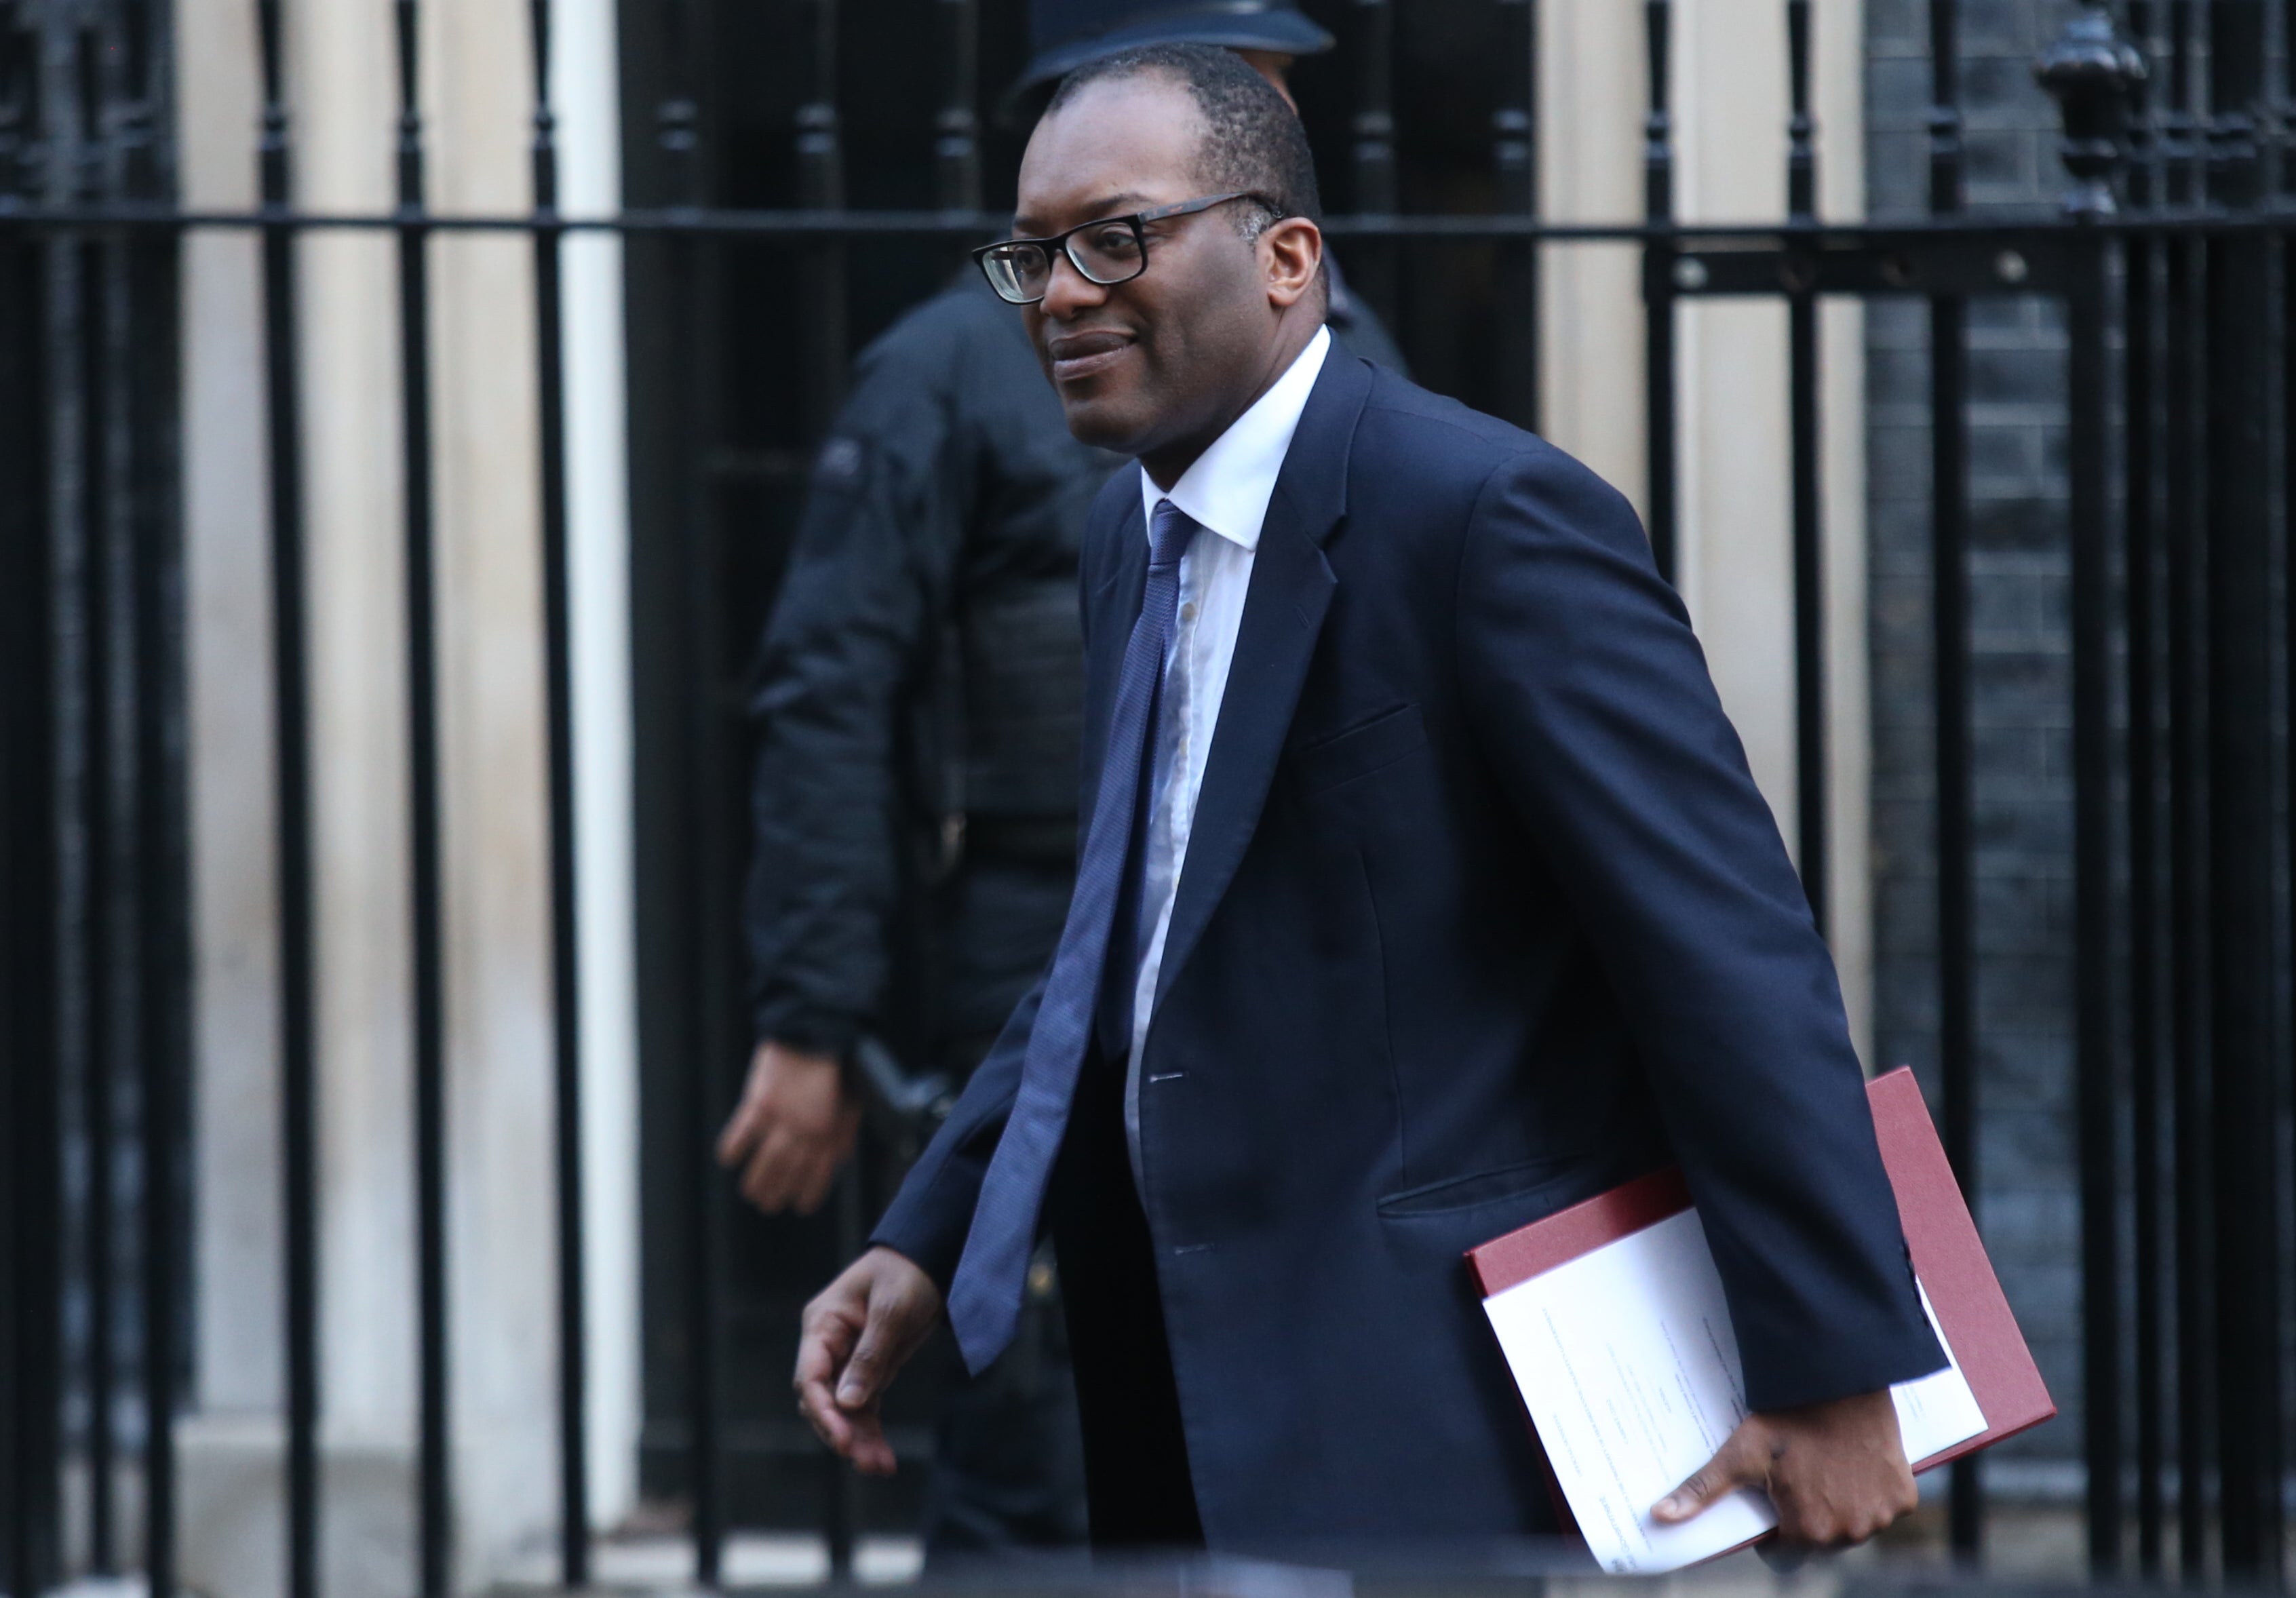 The prosecution is being brought on behalf of business secretary Kwasi Kwarteng